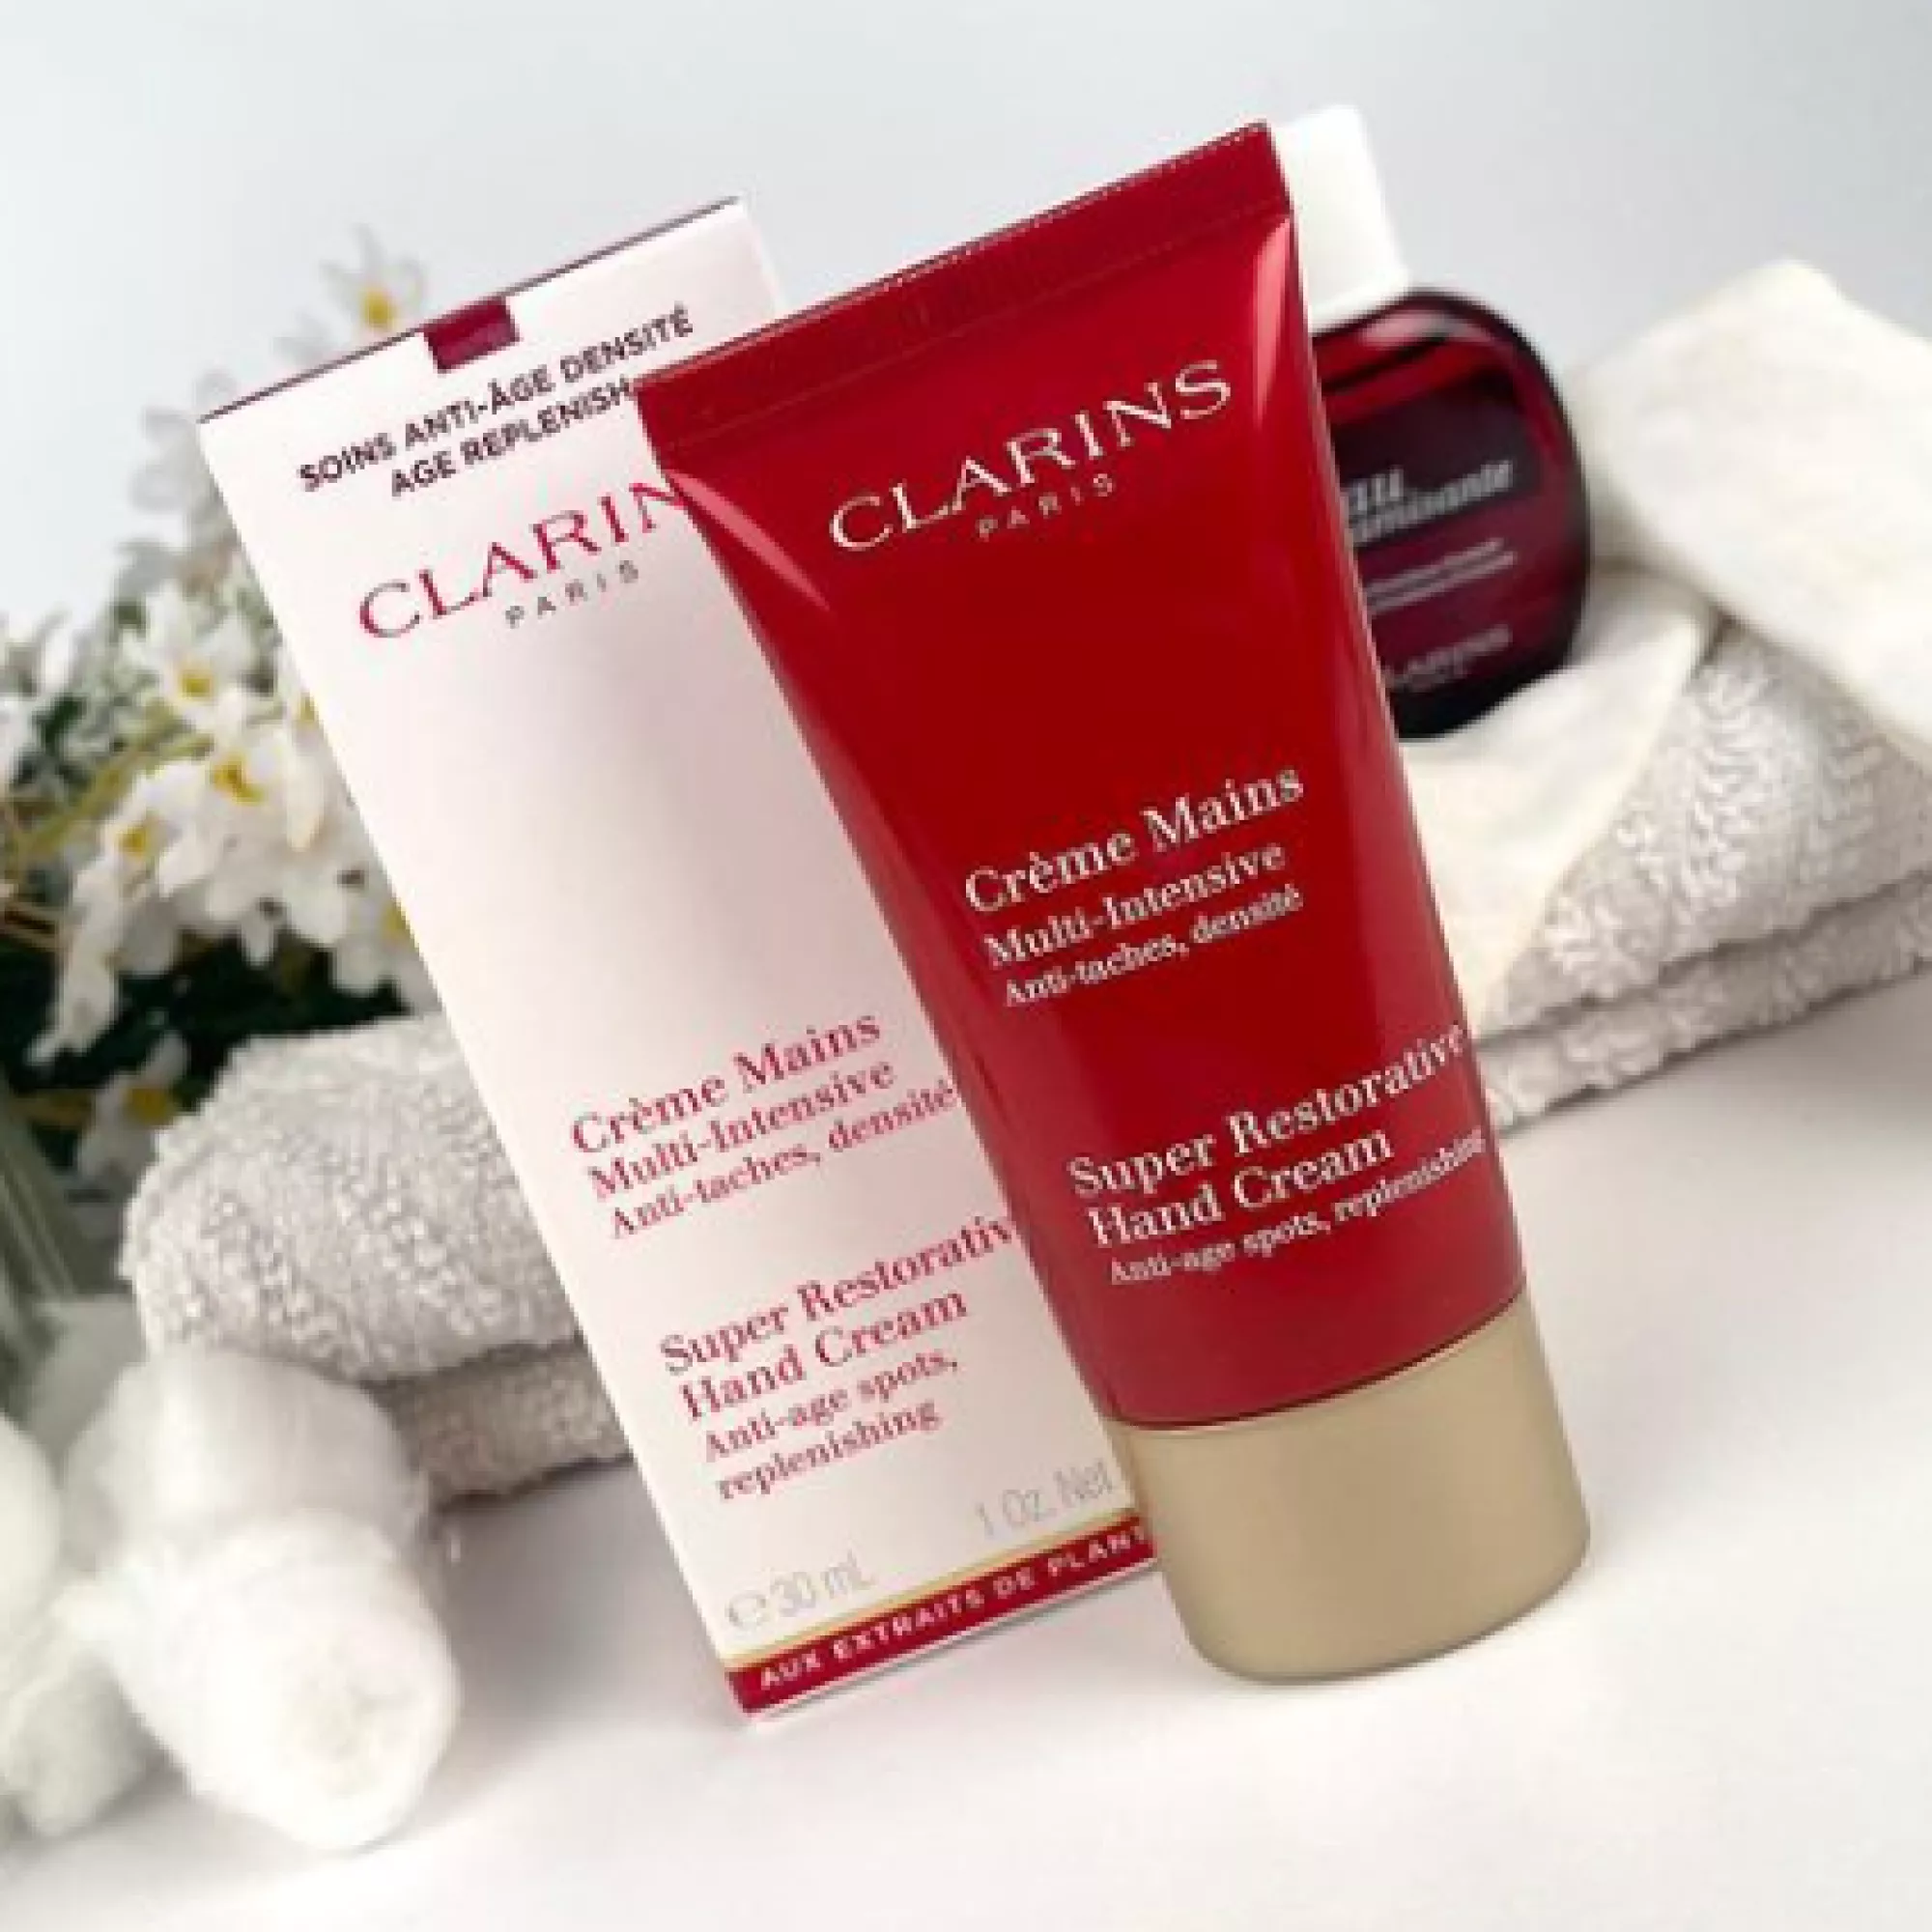 Beauty Outlet Clarins range